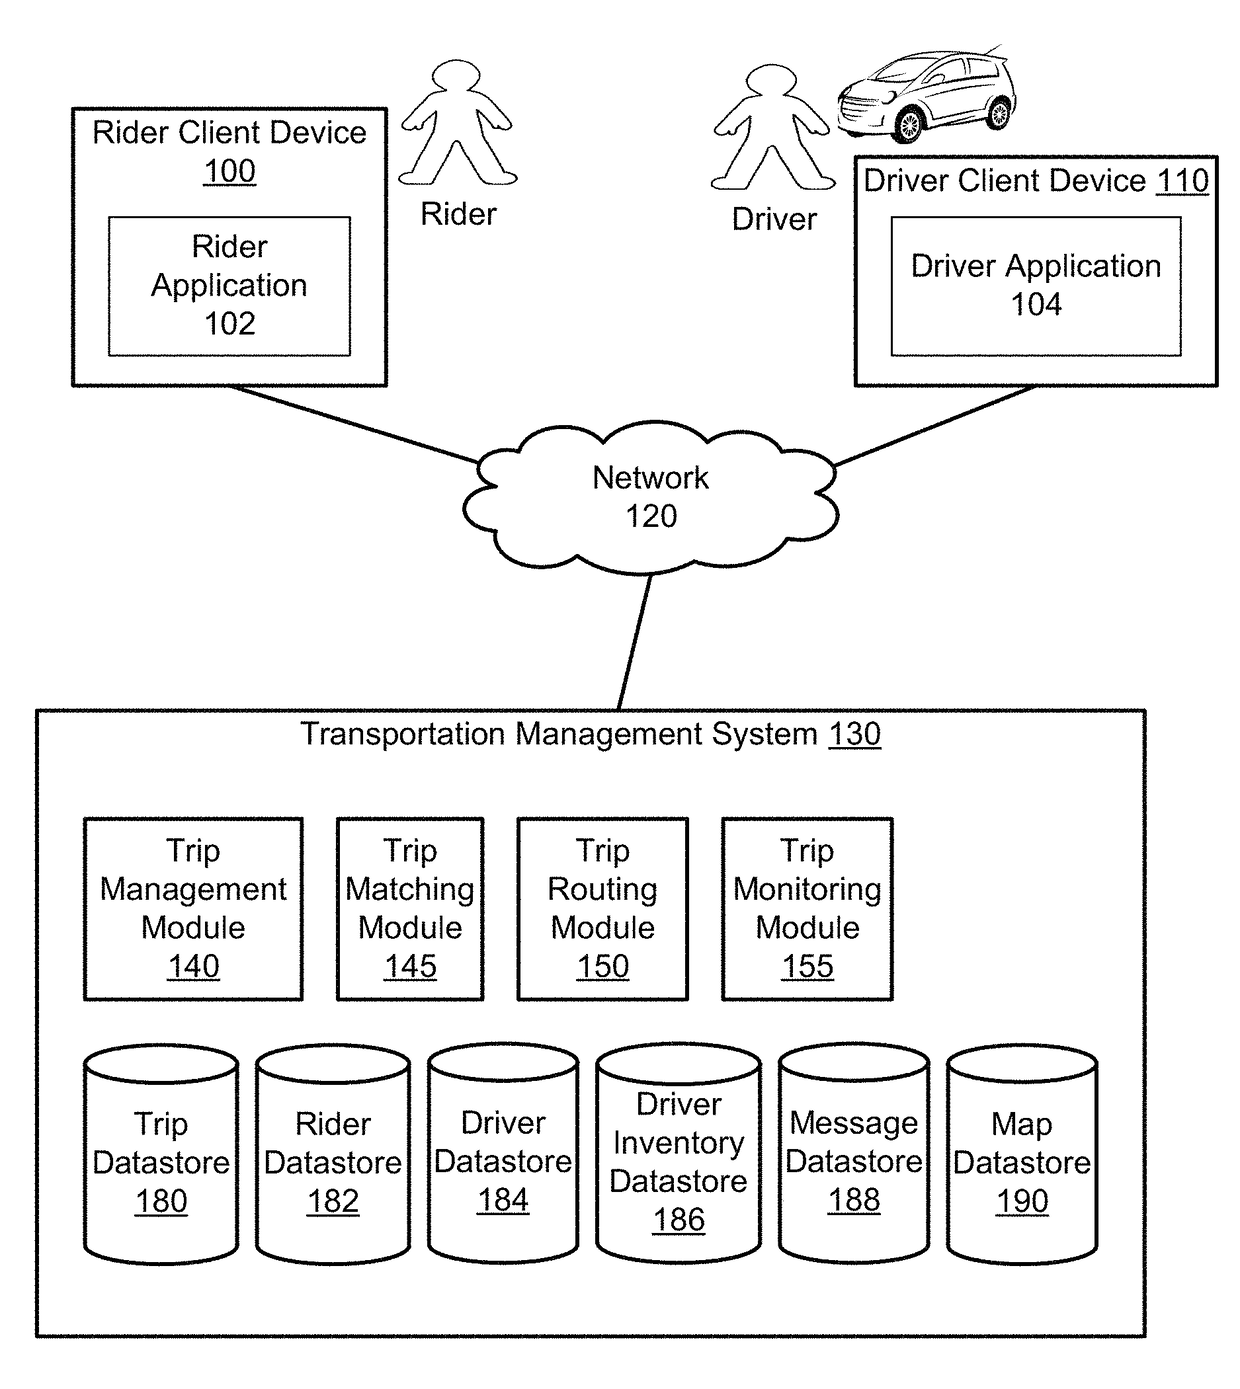 Providing alternative routing options to a rider of a transportation management system